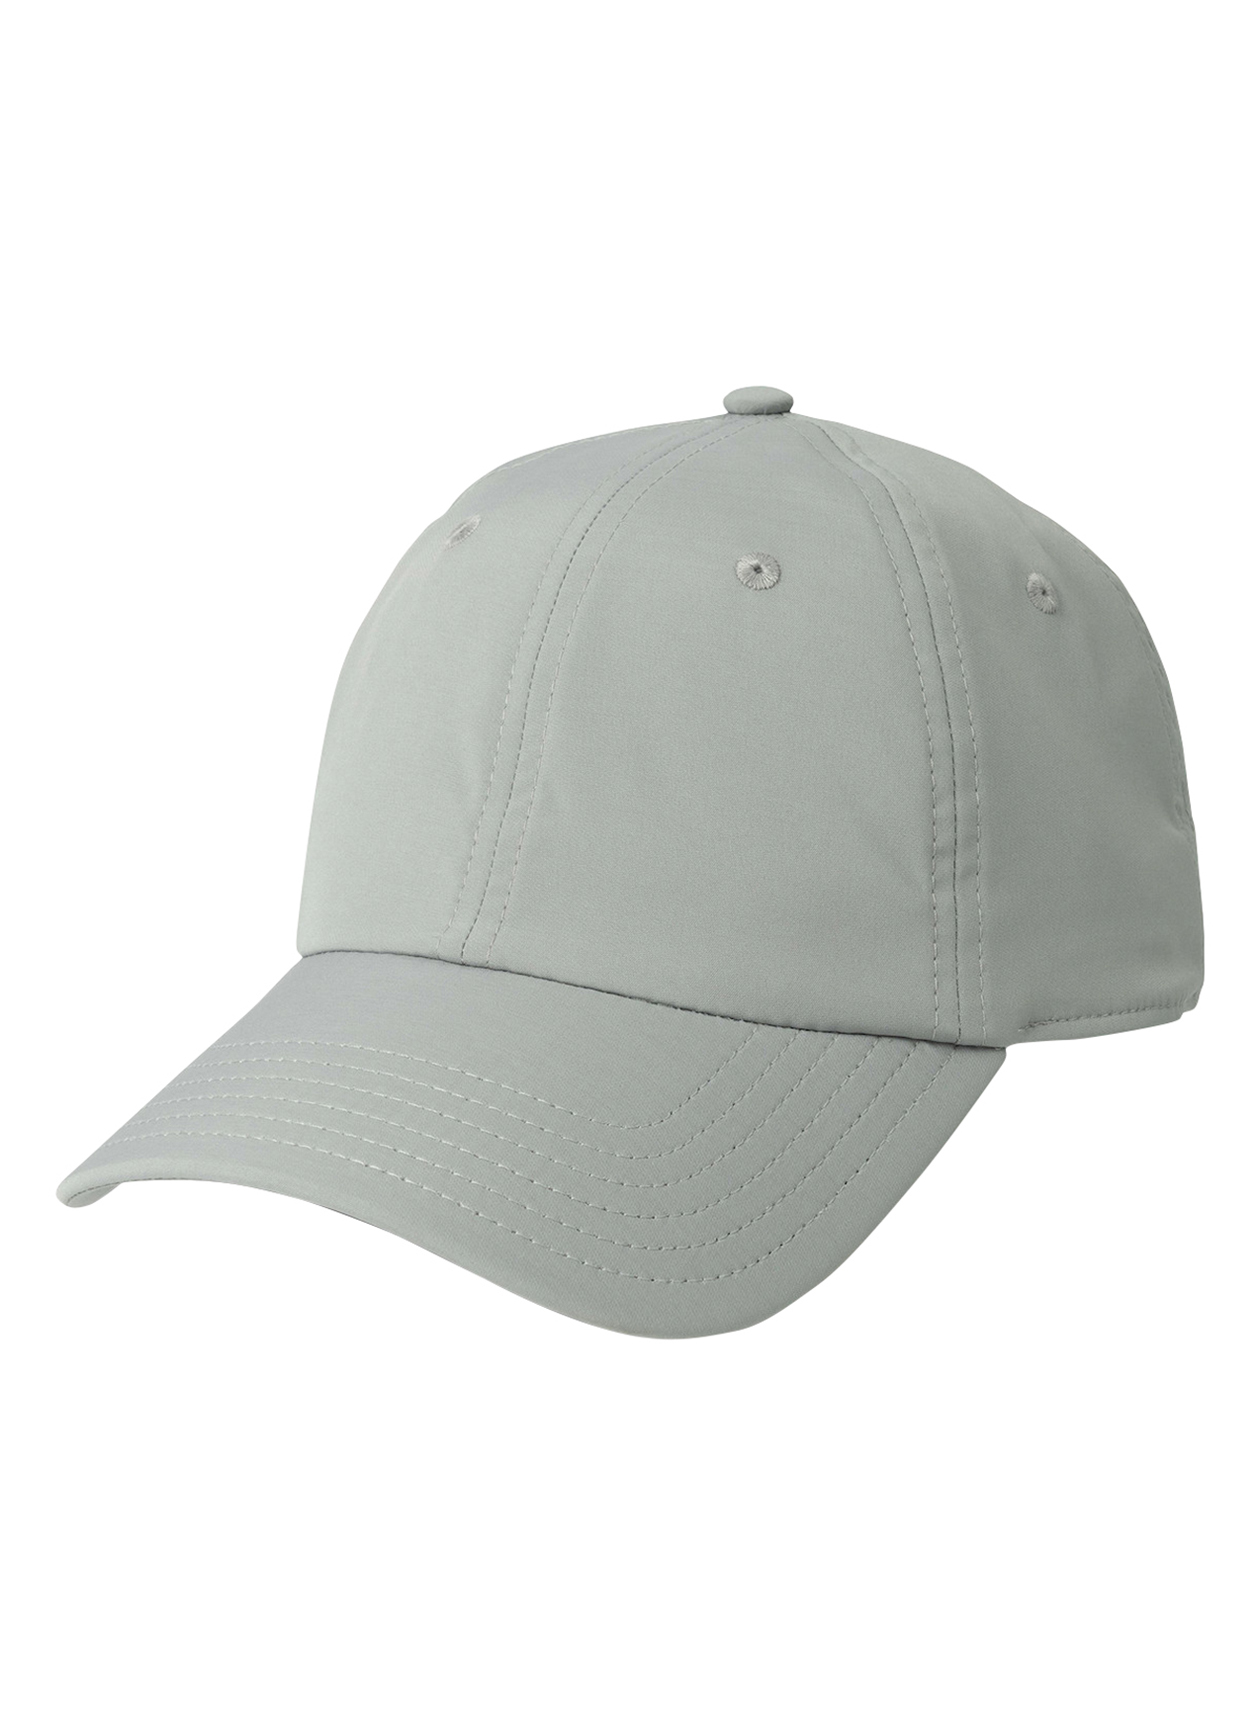 Southern Tide ST6640 - Performance Hat